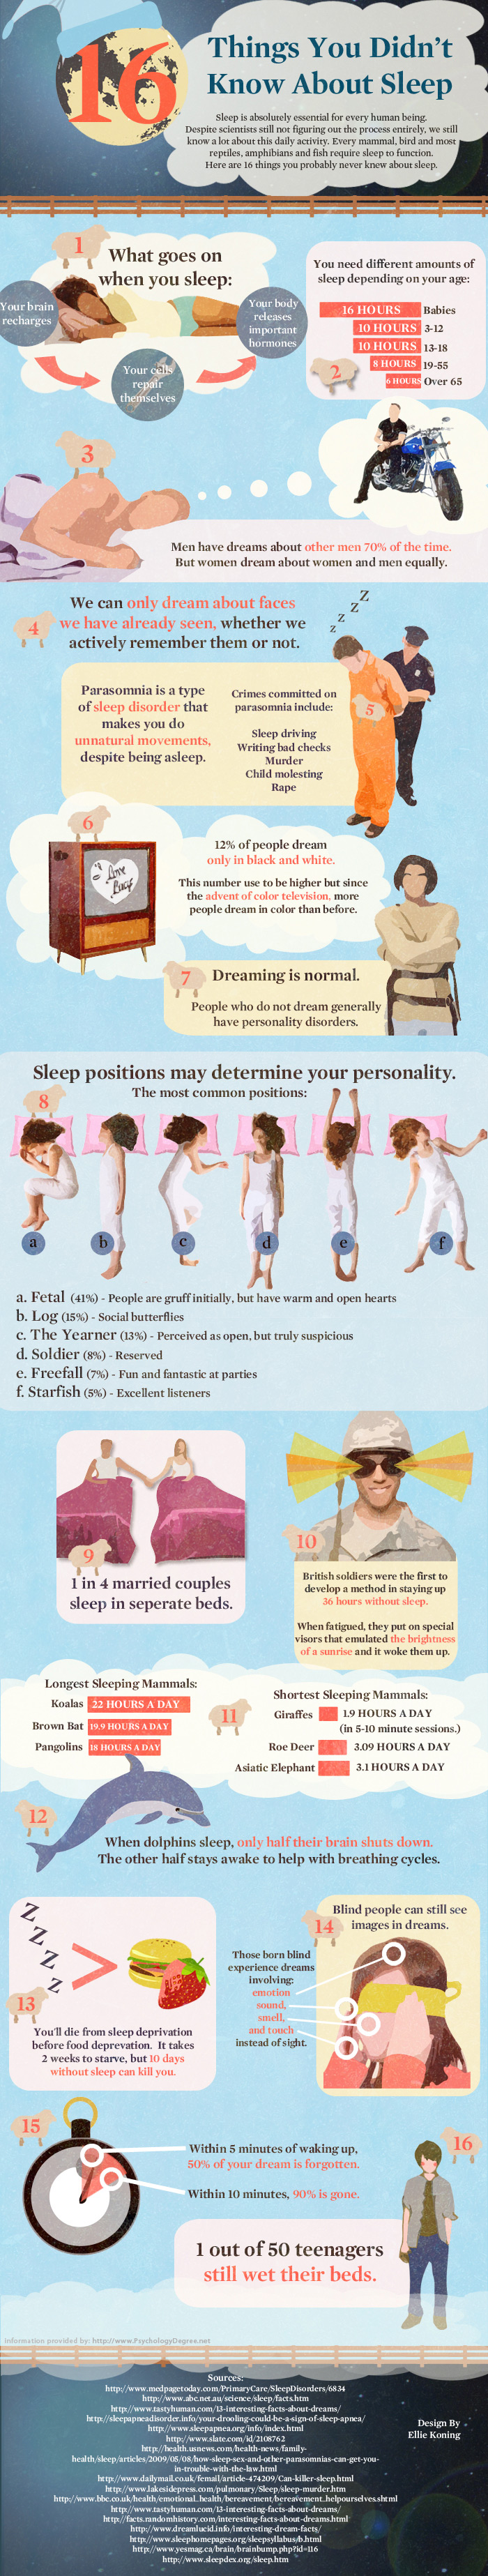 16-things-you-didnt-know-about-sleep1